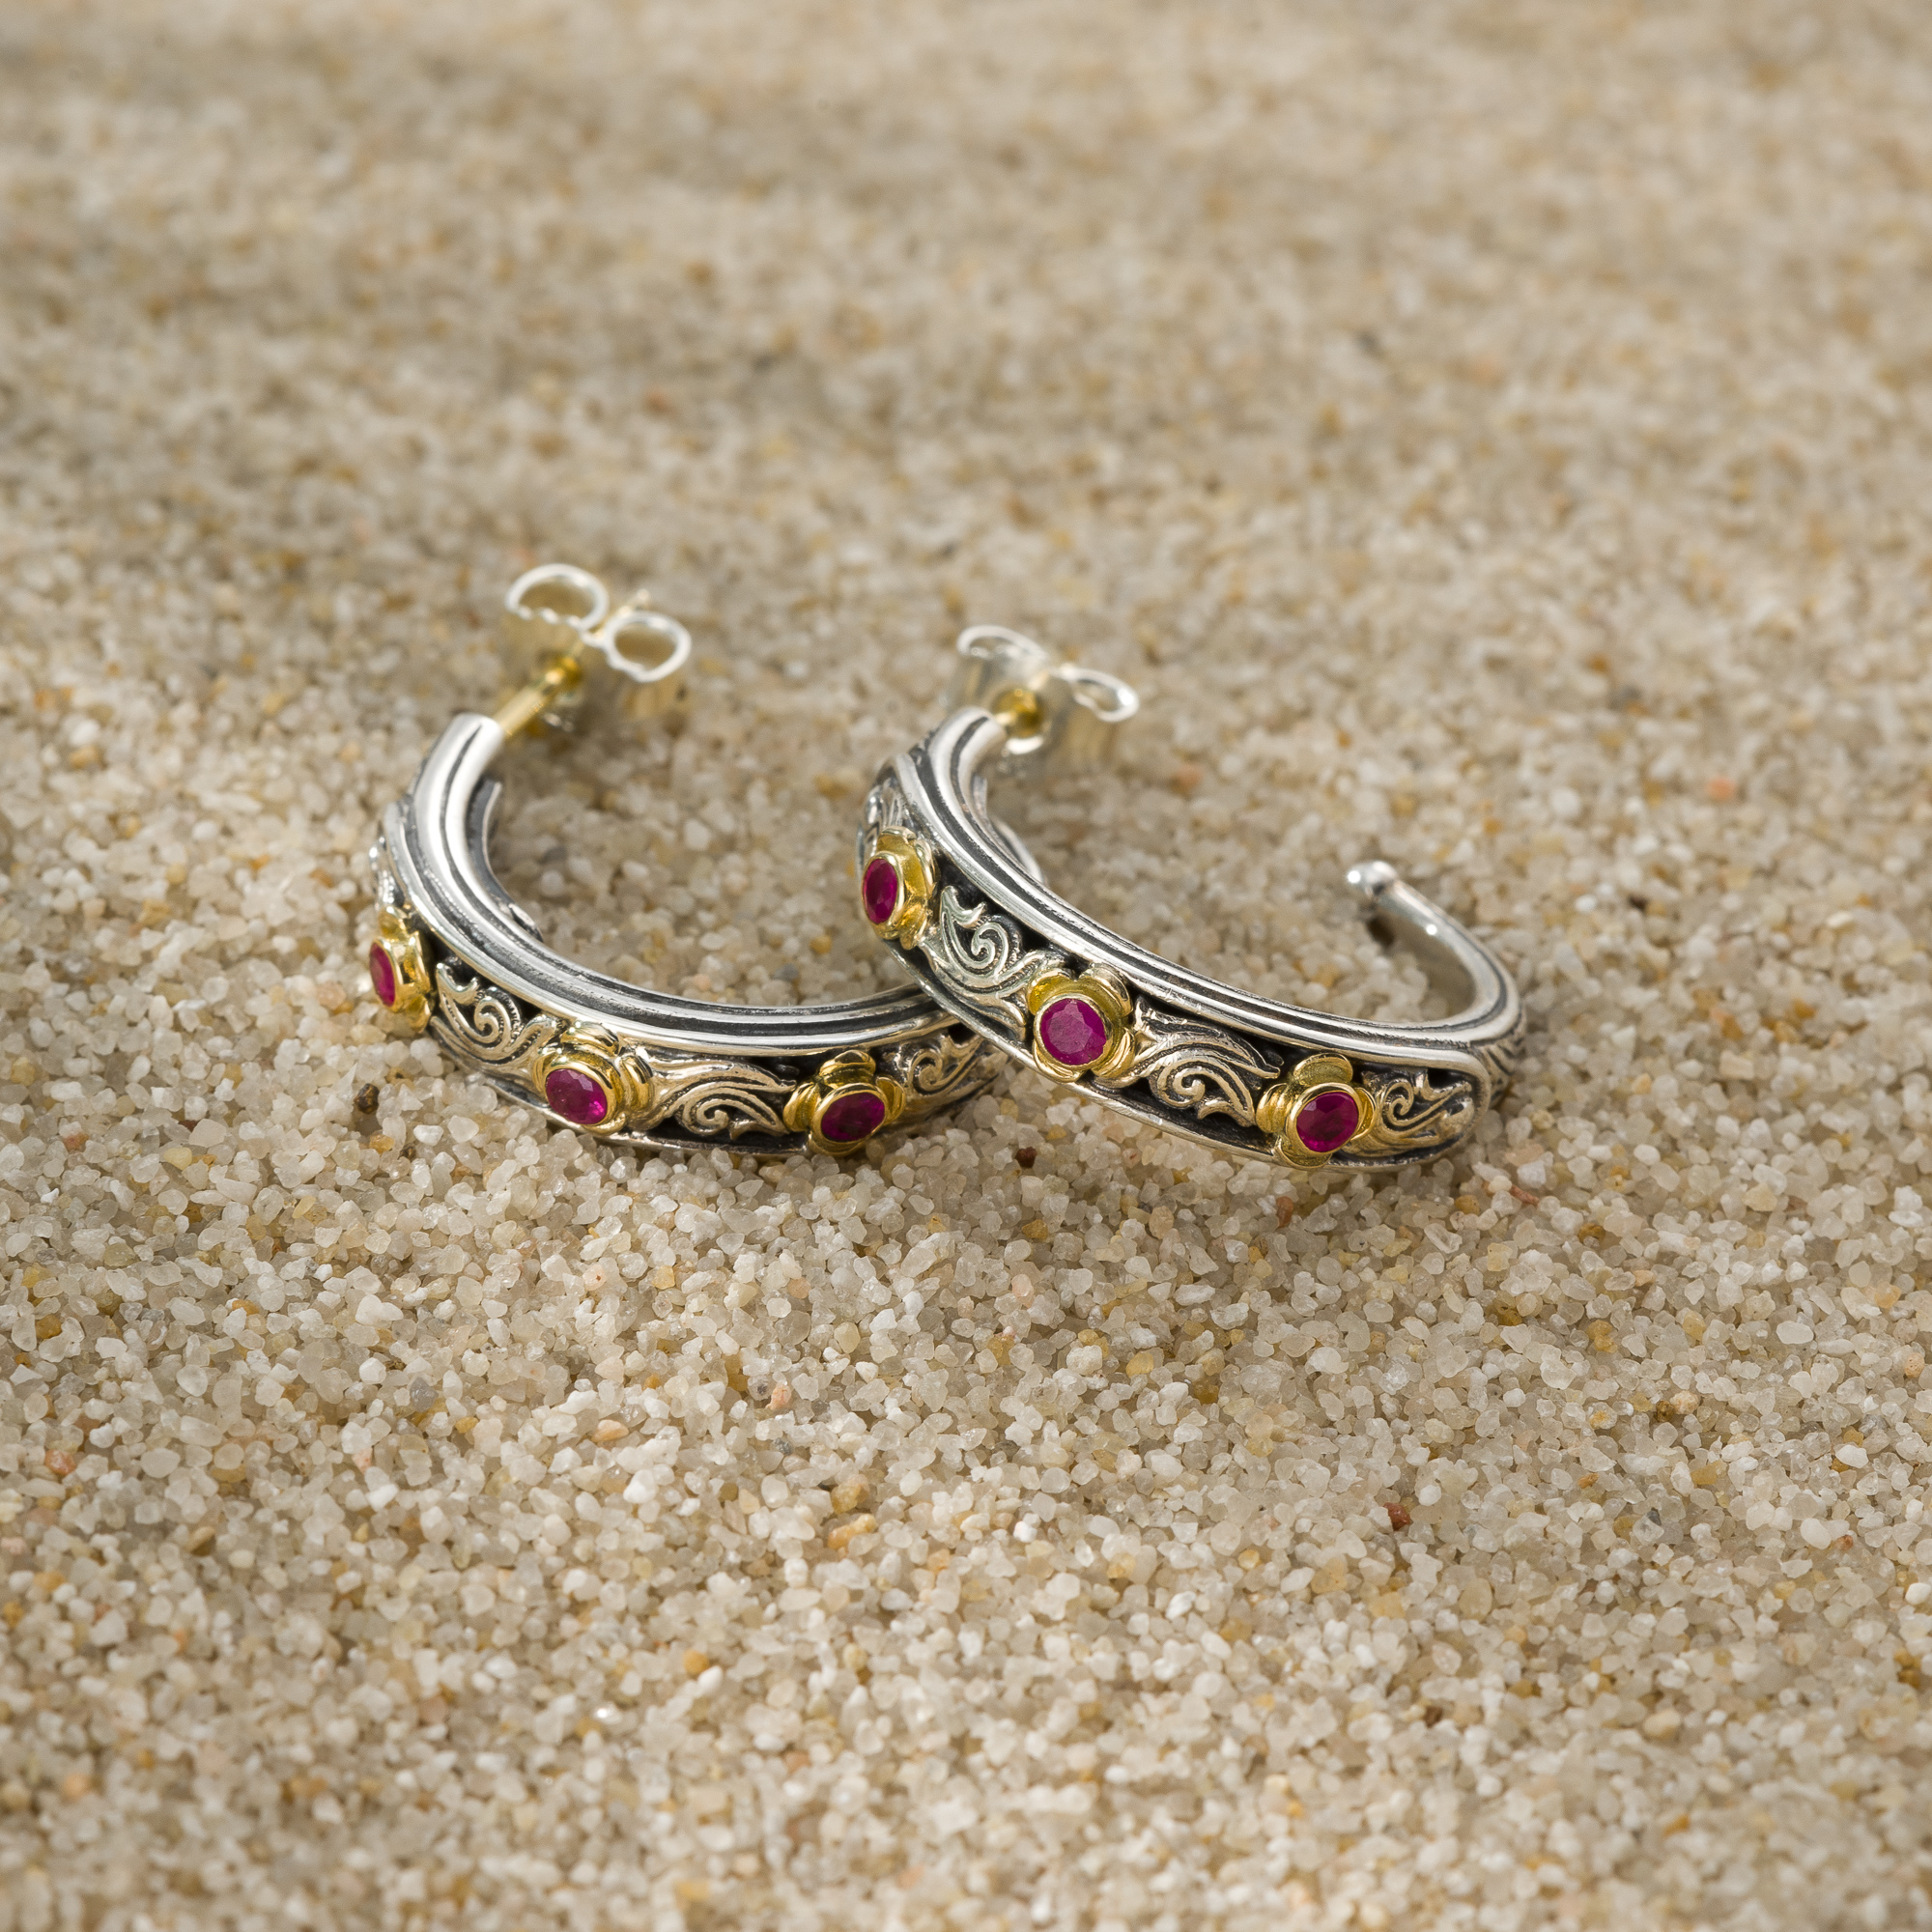 Nefeli Hoops earrings in 18K Gold and sterling silver with rubies